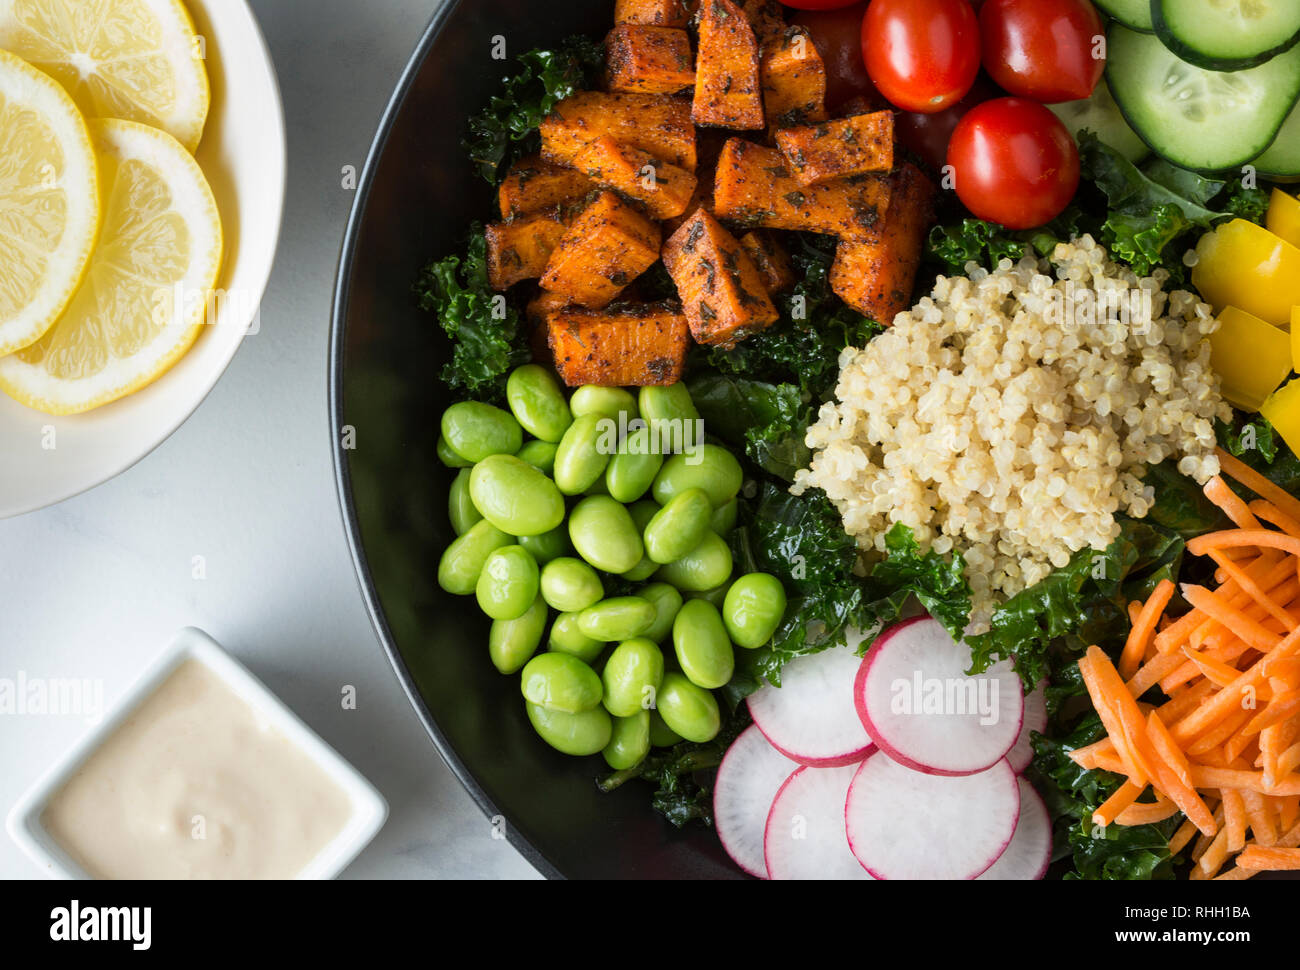 Aerial view of healthy kale salad bowl with vegetables- sweet potatoes, tomatoes, cucumber, bell peppers, carrot, radish, and edamame with quinoa. Stock Photo